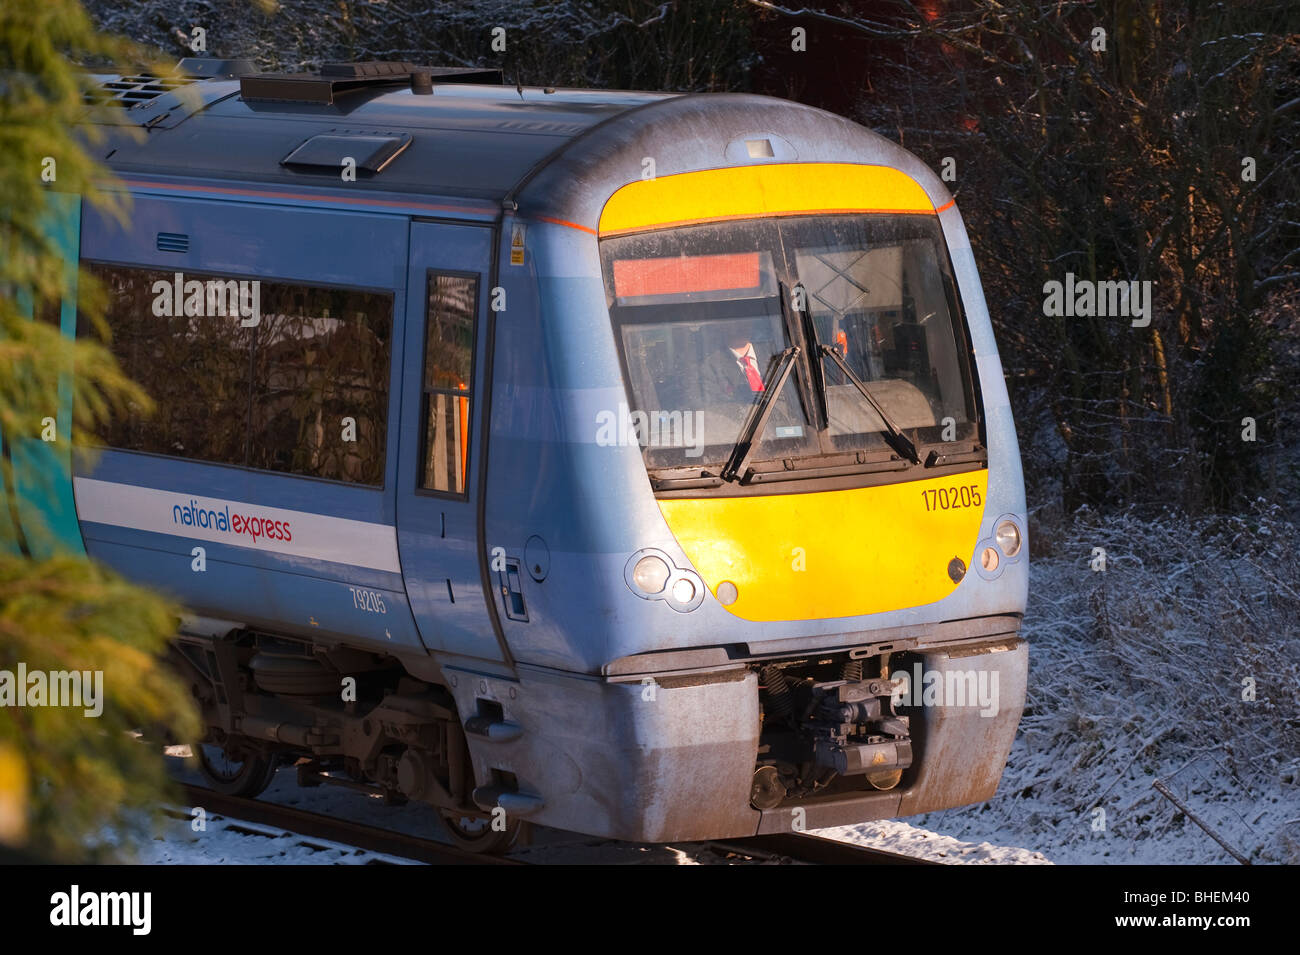 A National Express diesel locomotive train on the Suffolk line in the snow in the Uk Stock Photo